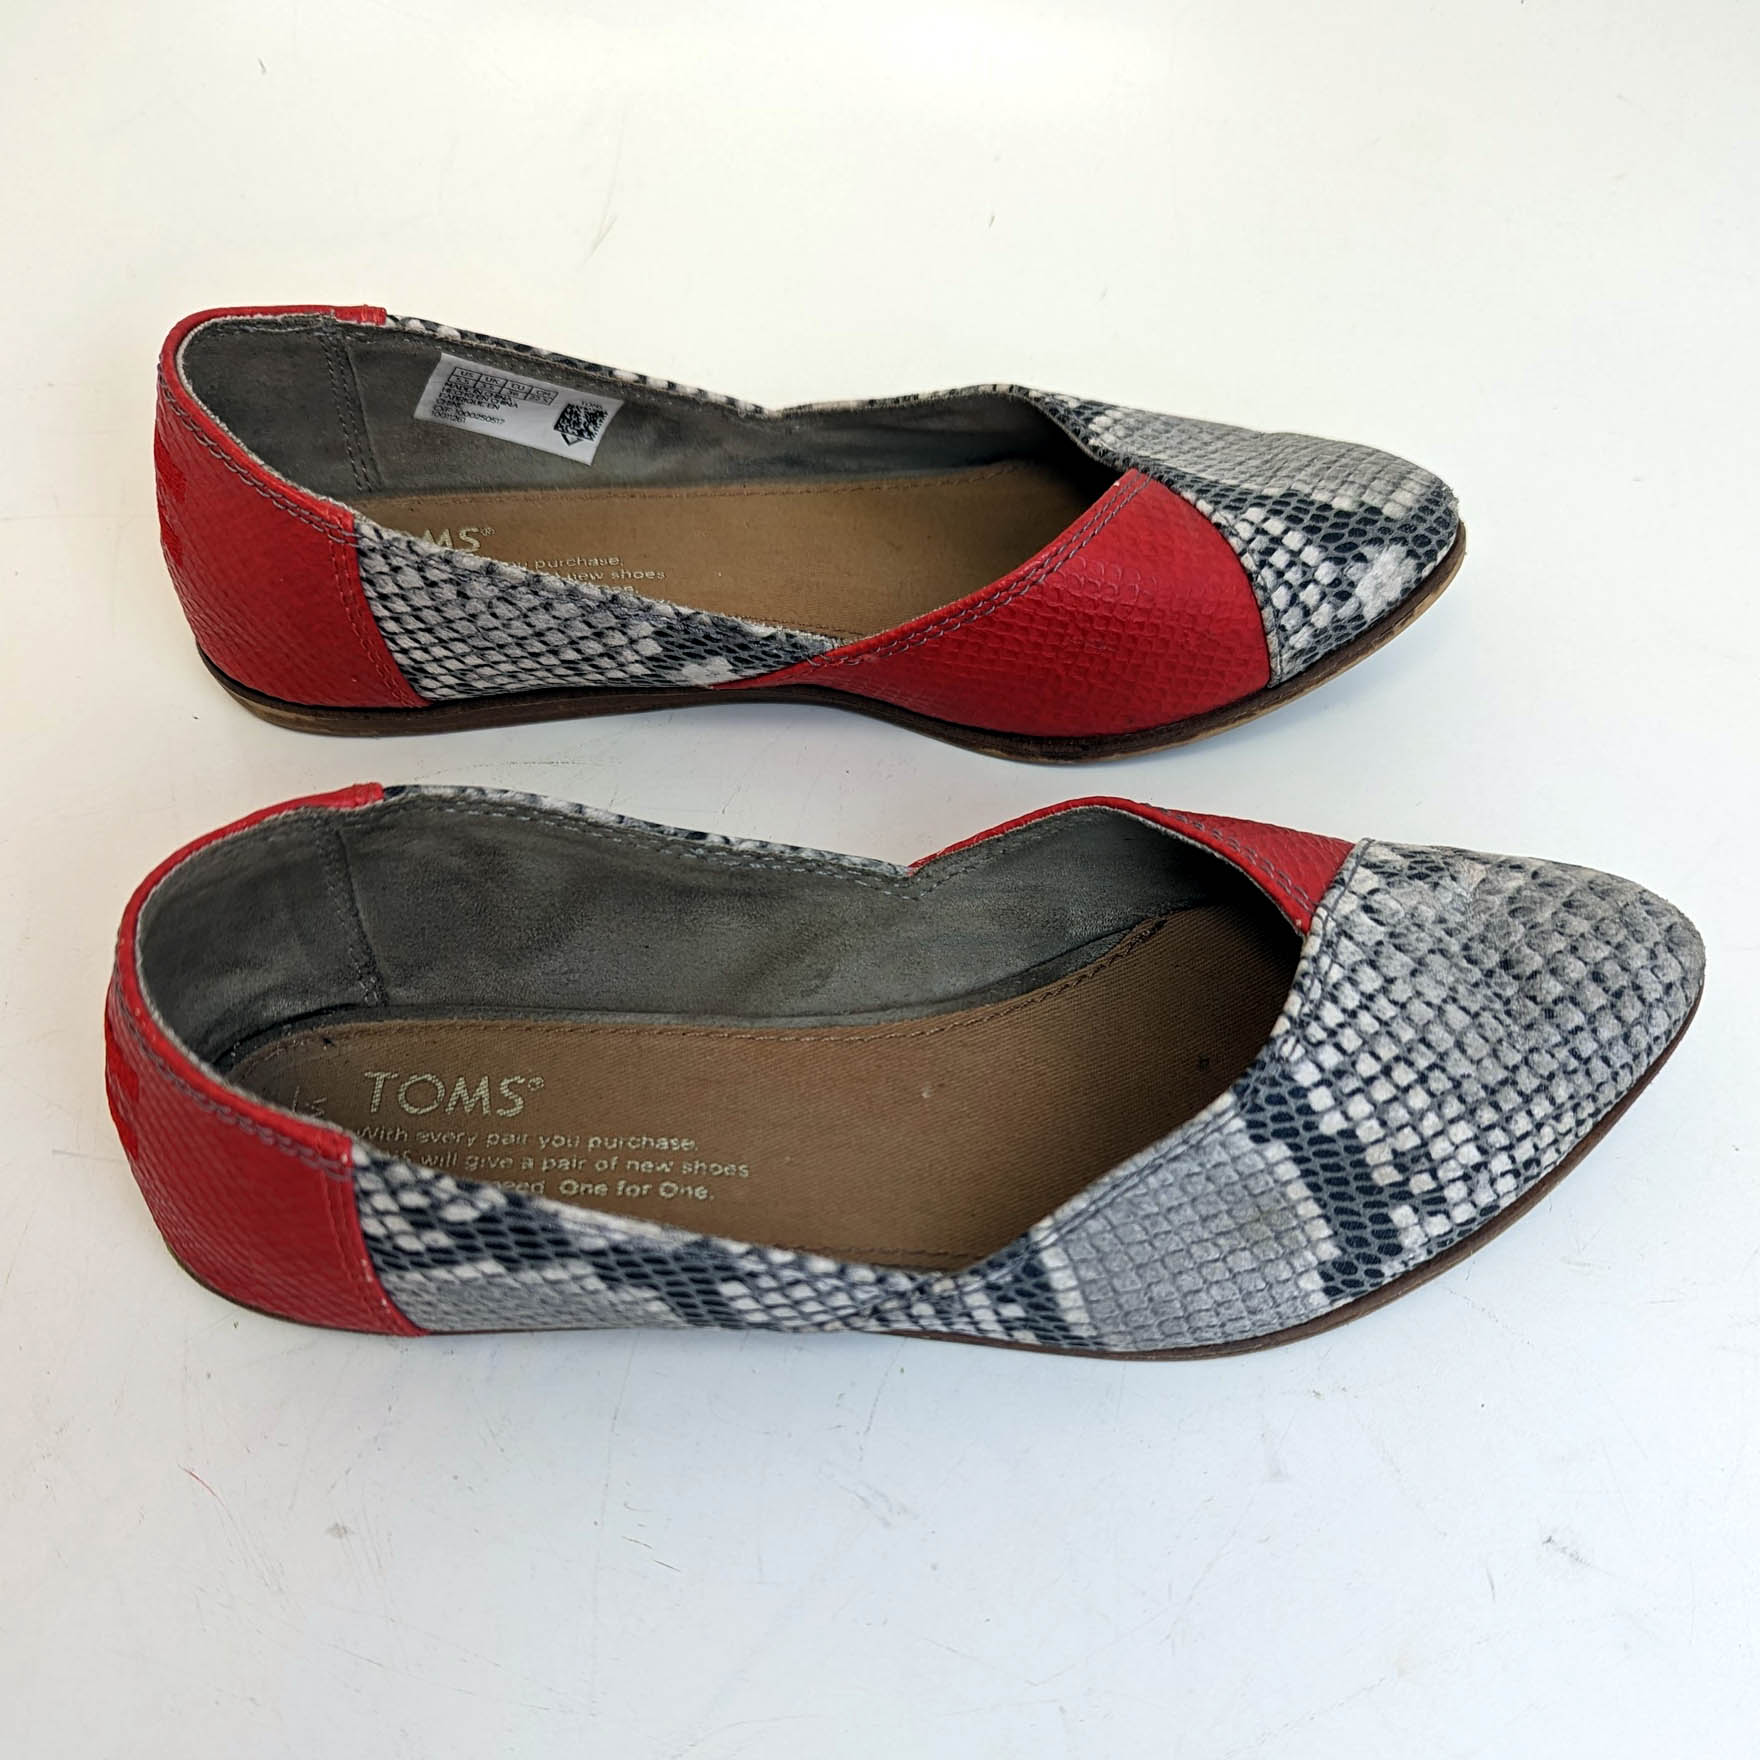 Toms Womens Jutti Ballet Flat Shoes Red Snakeskin Pointed Toe Size 5.5